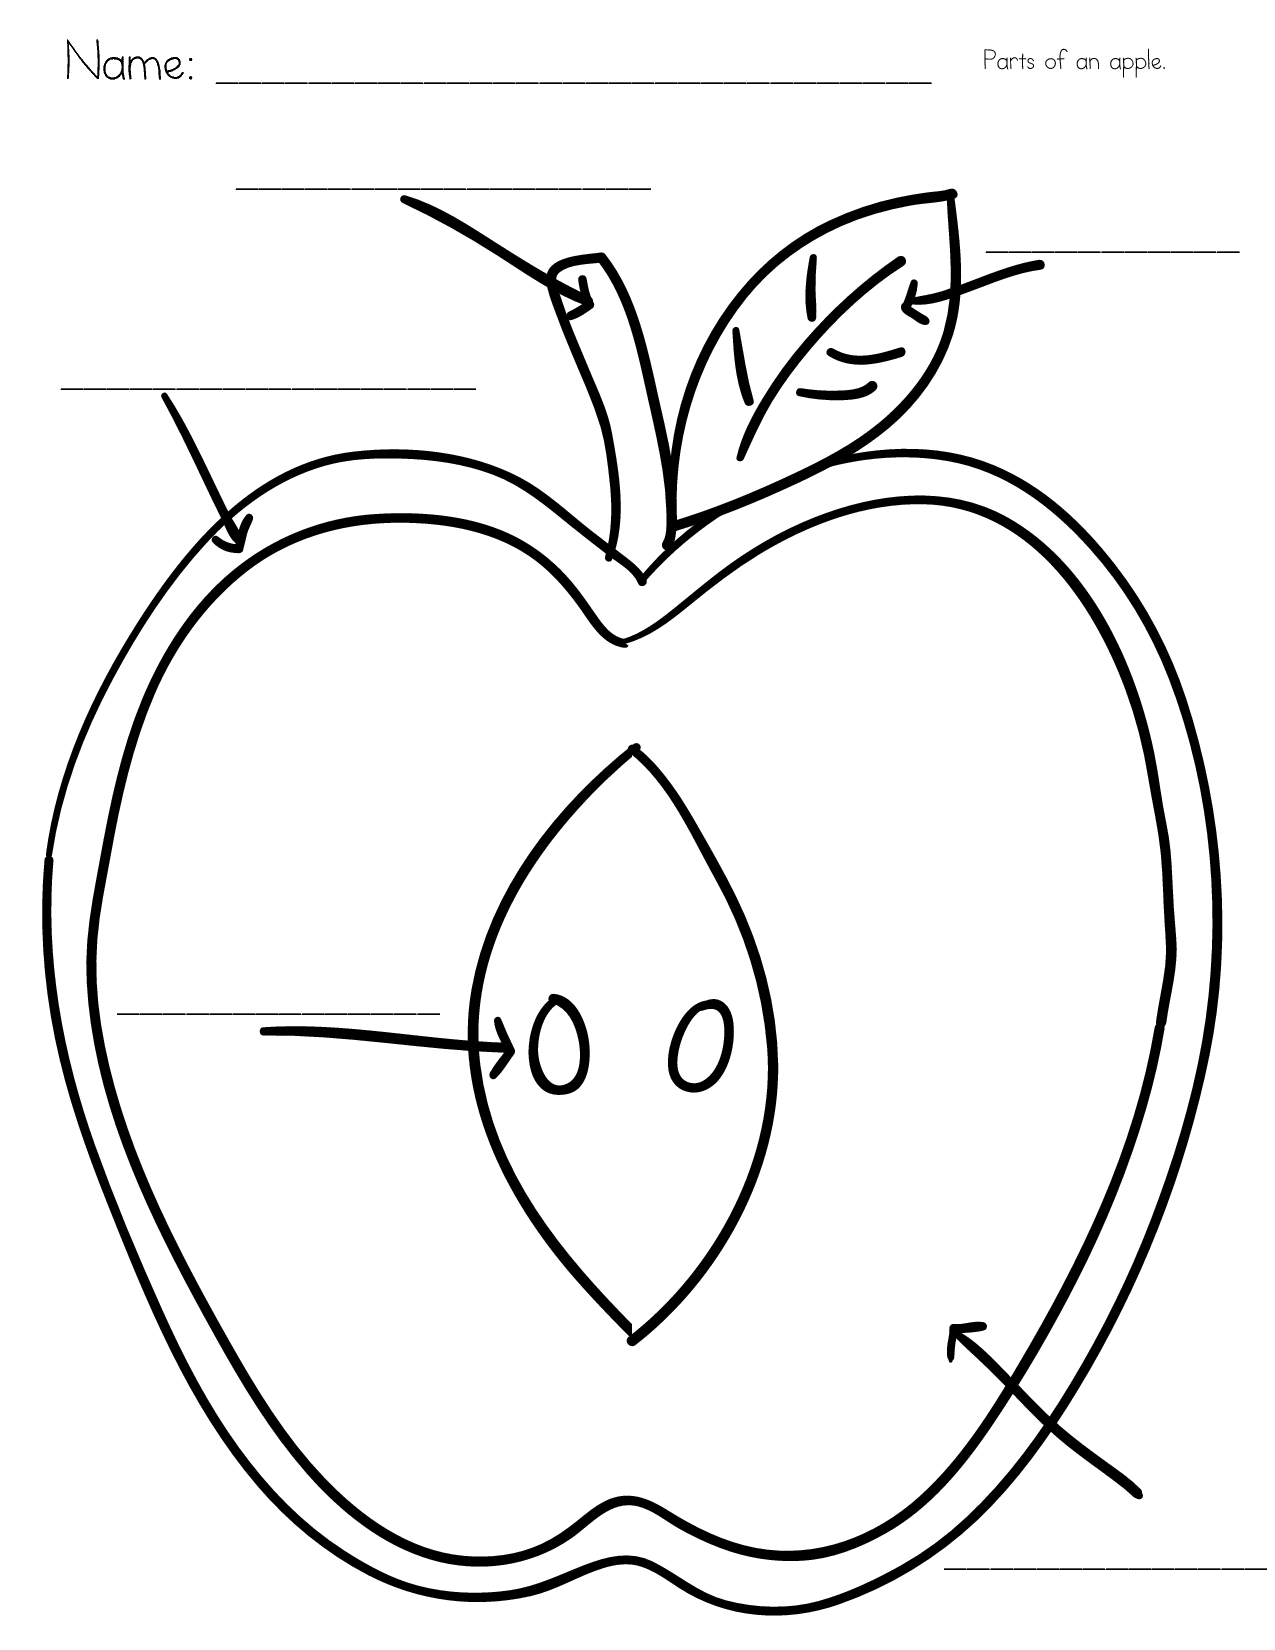 parts of an apple - ClipArt Best - ClipArt Best With Regard To Parts Of An Apple Worksheet